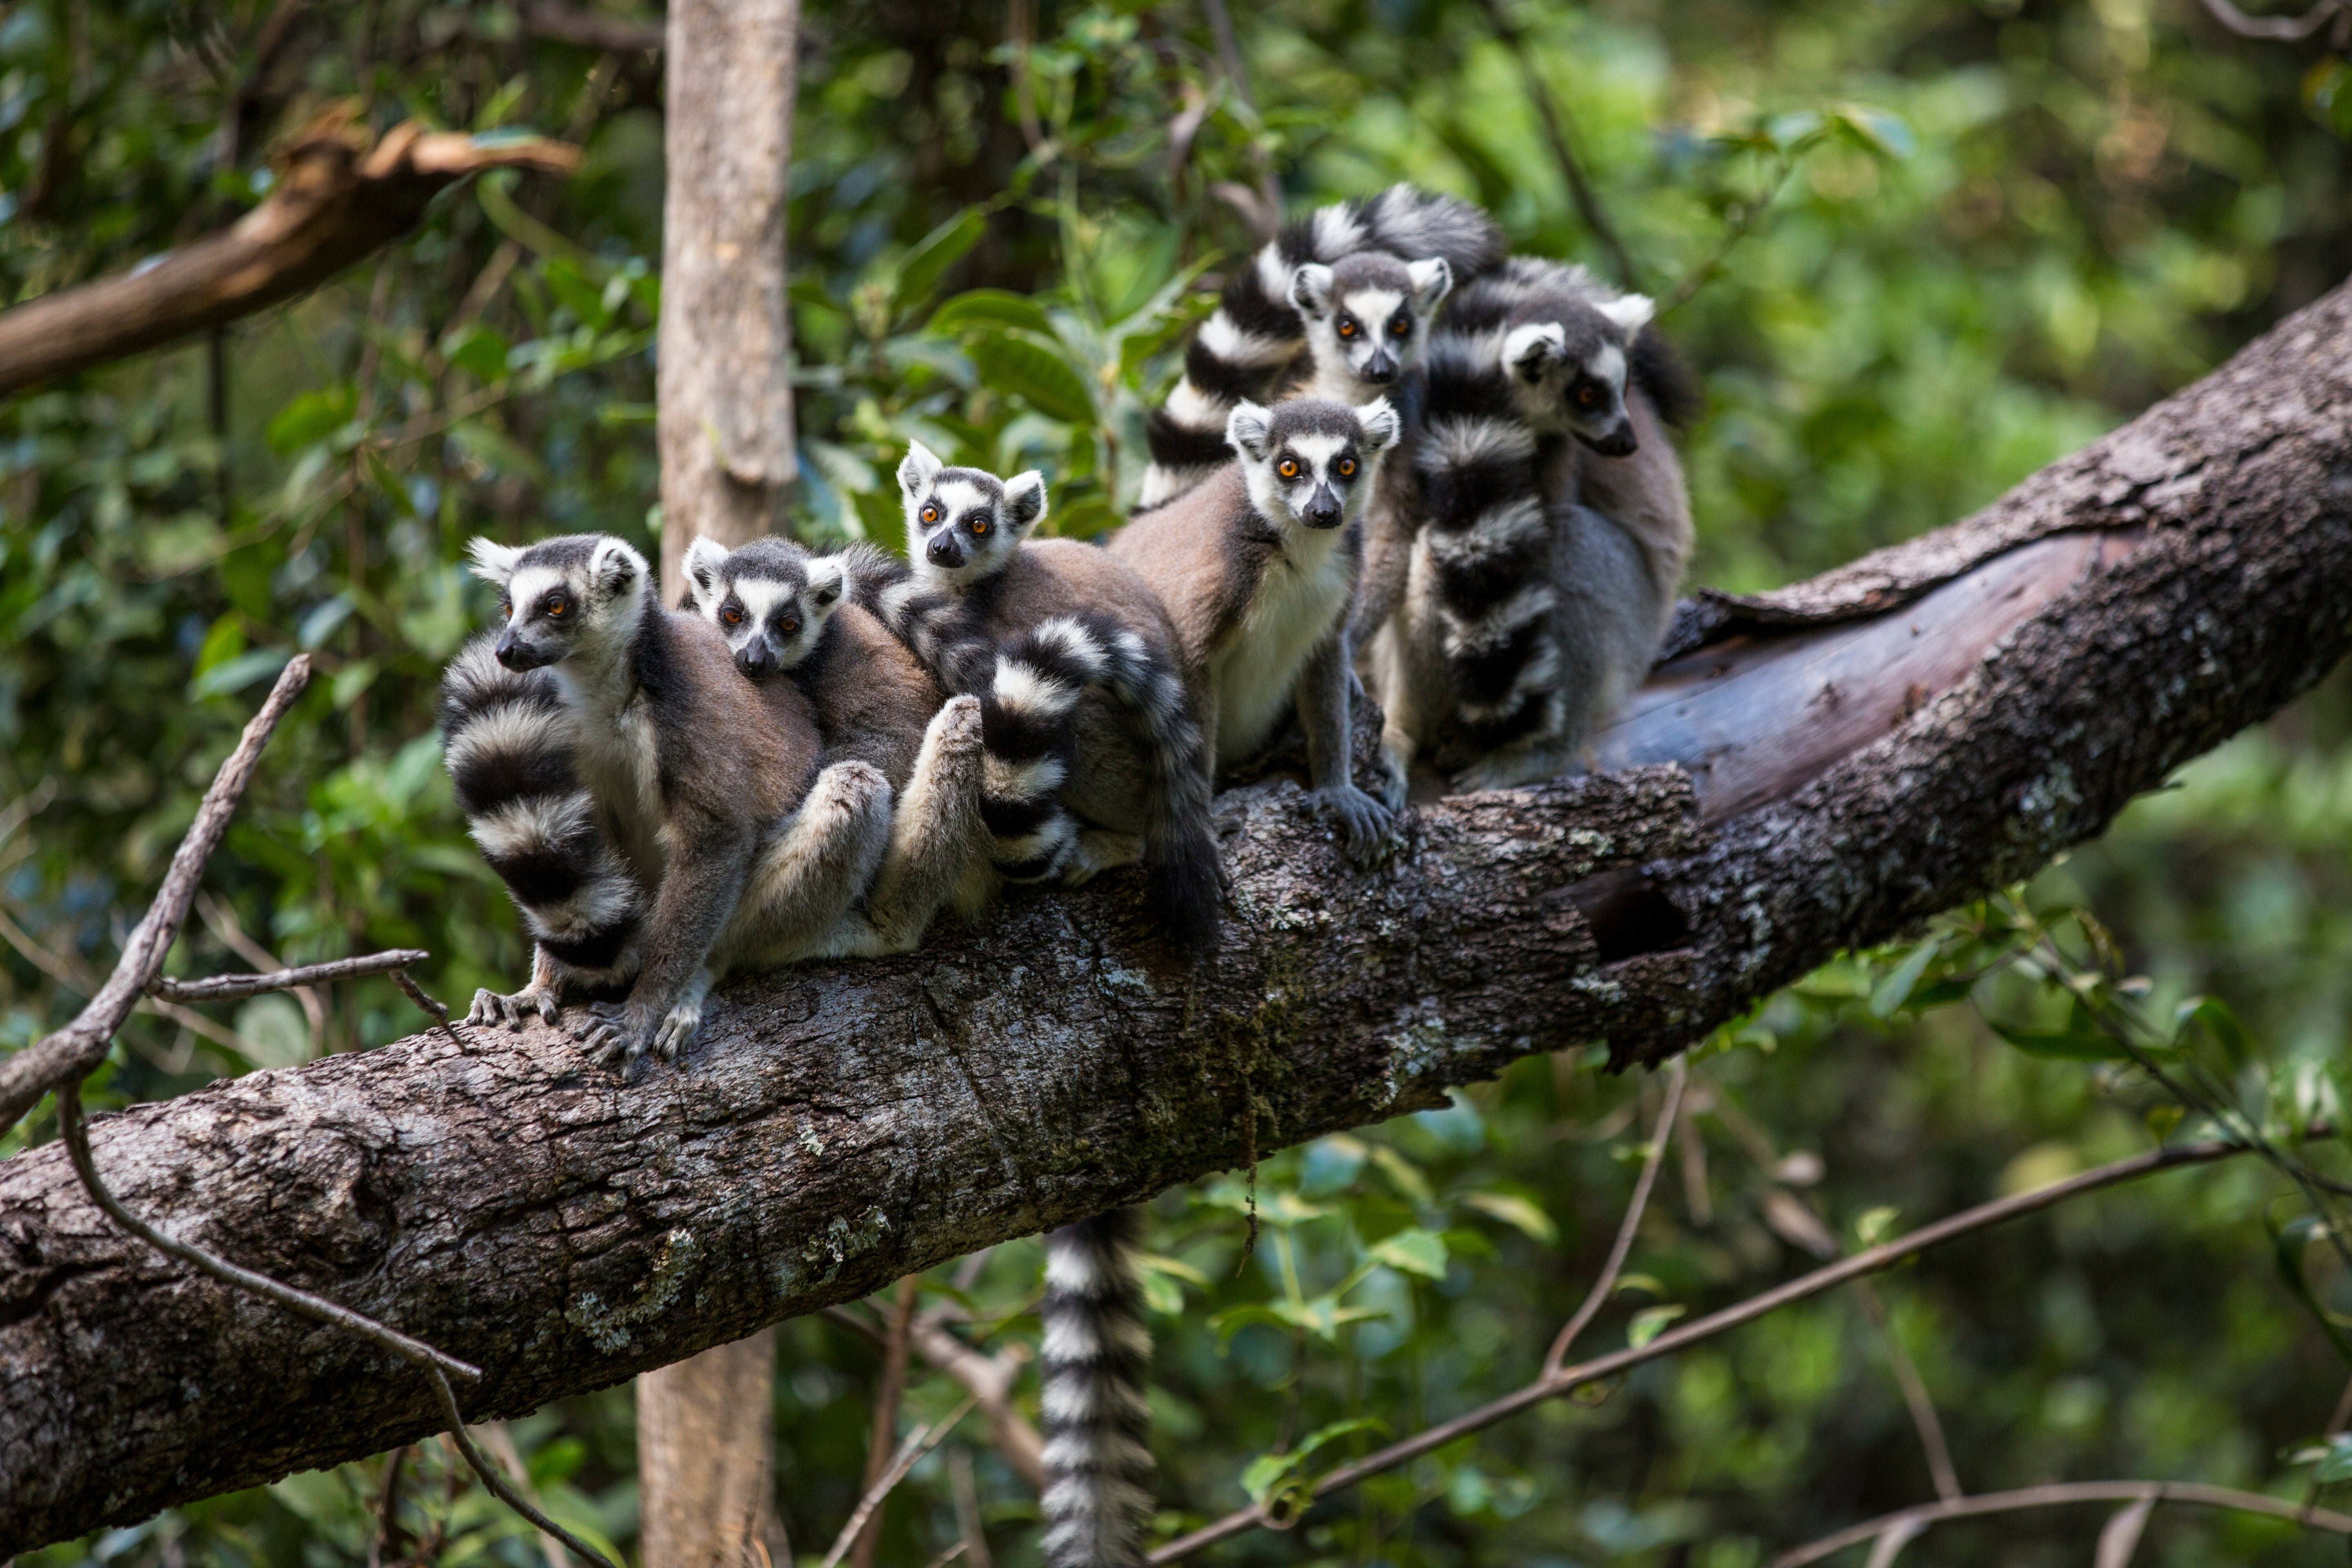 Mammals That Live Together Live Longer - Scientific American